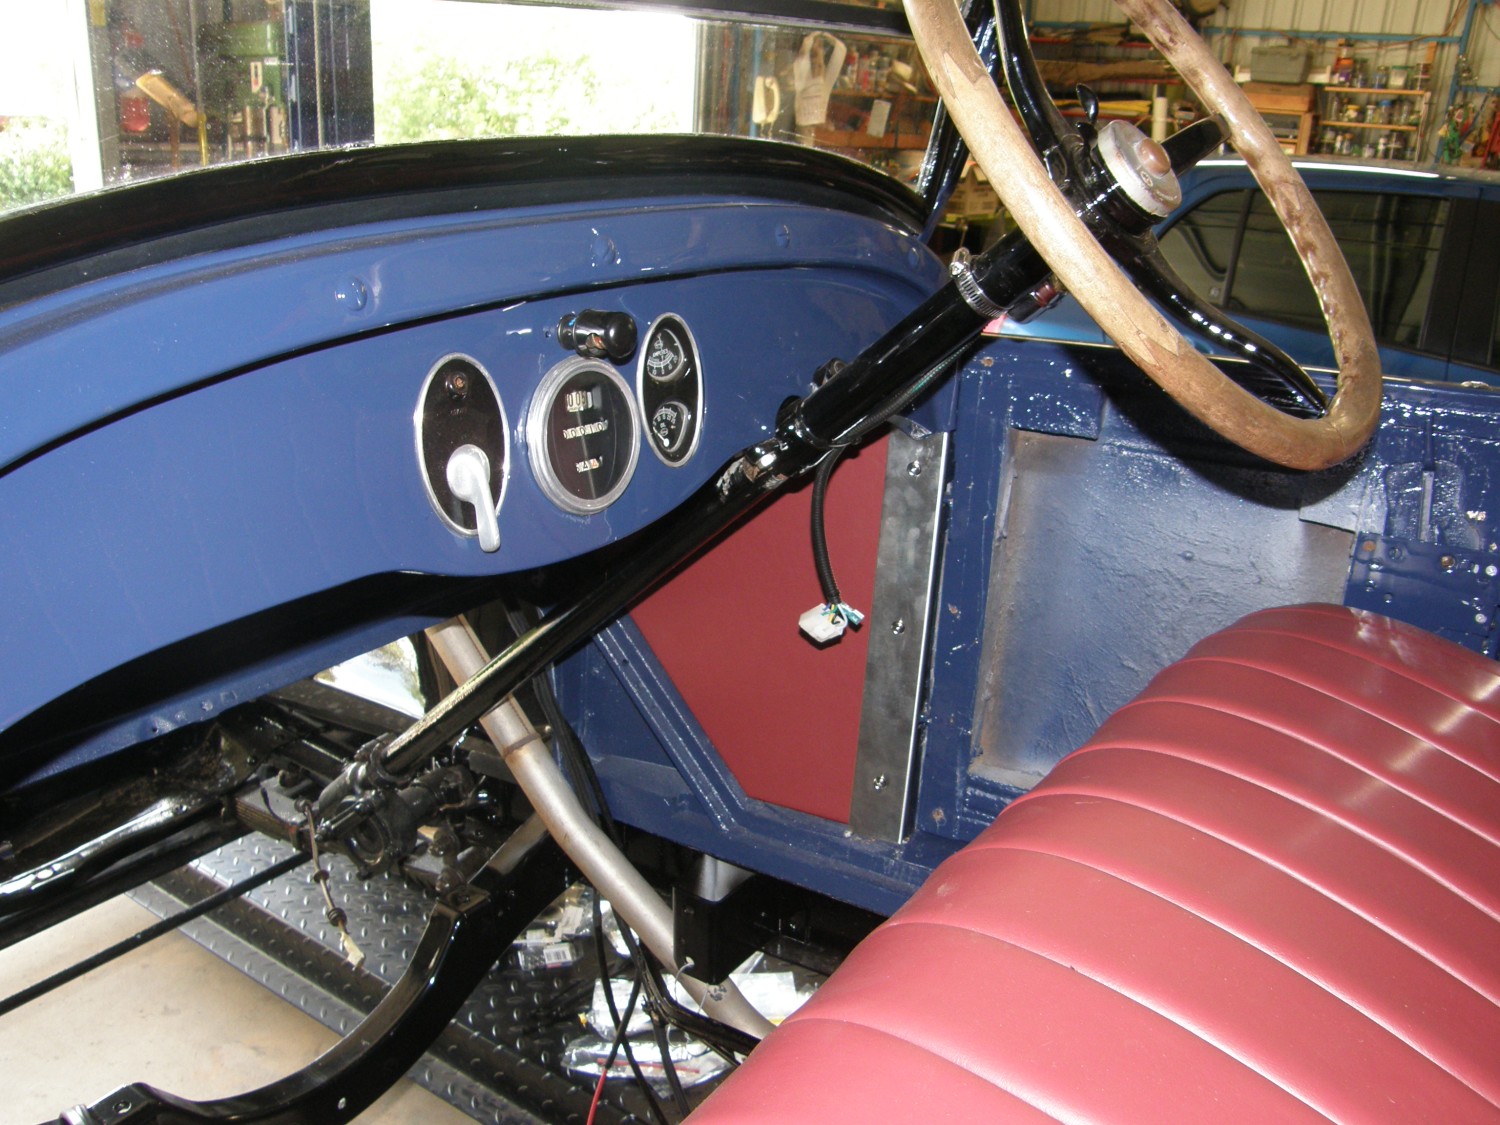 1927 Chevrolet Capitol Touring